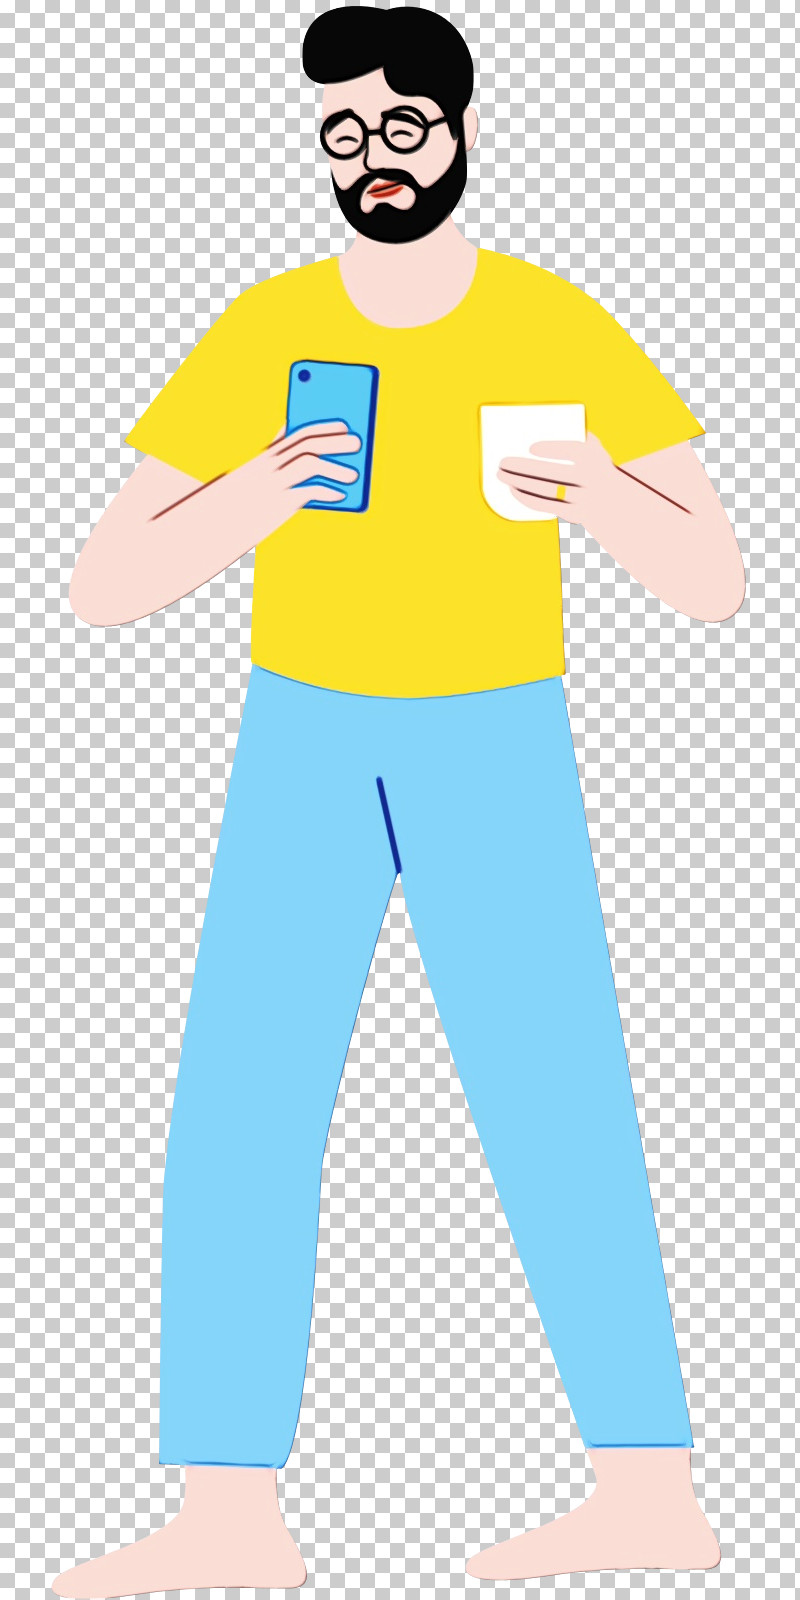 T-shirt Sleeve Cartoon Yellow Costume PNG, Clipart, Cartoon, Costume, Paint, Posture, Sleeve Free PNG Download